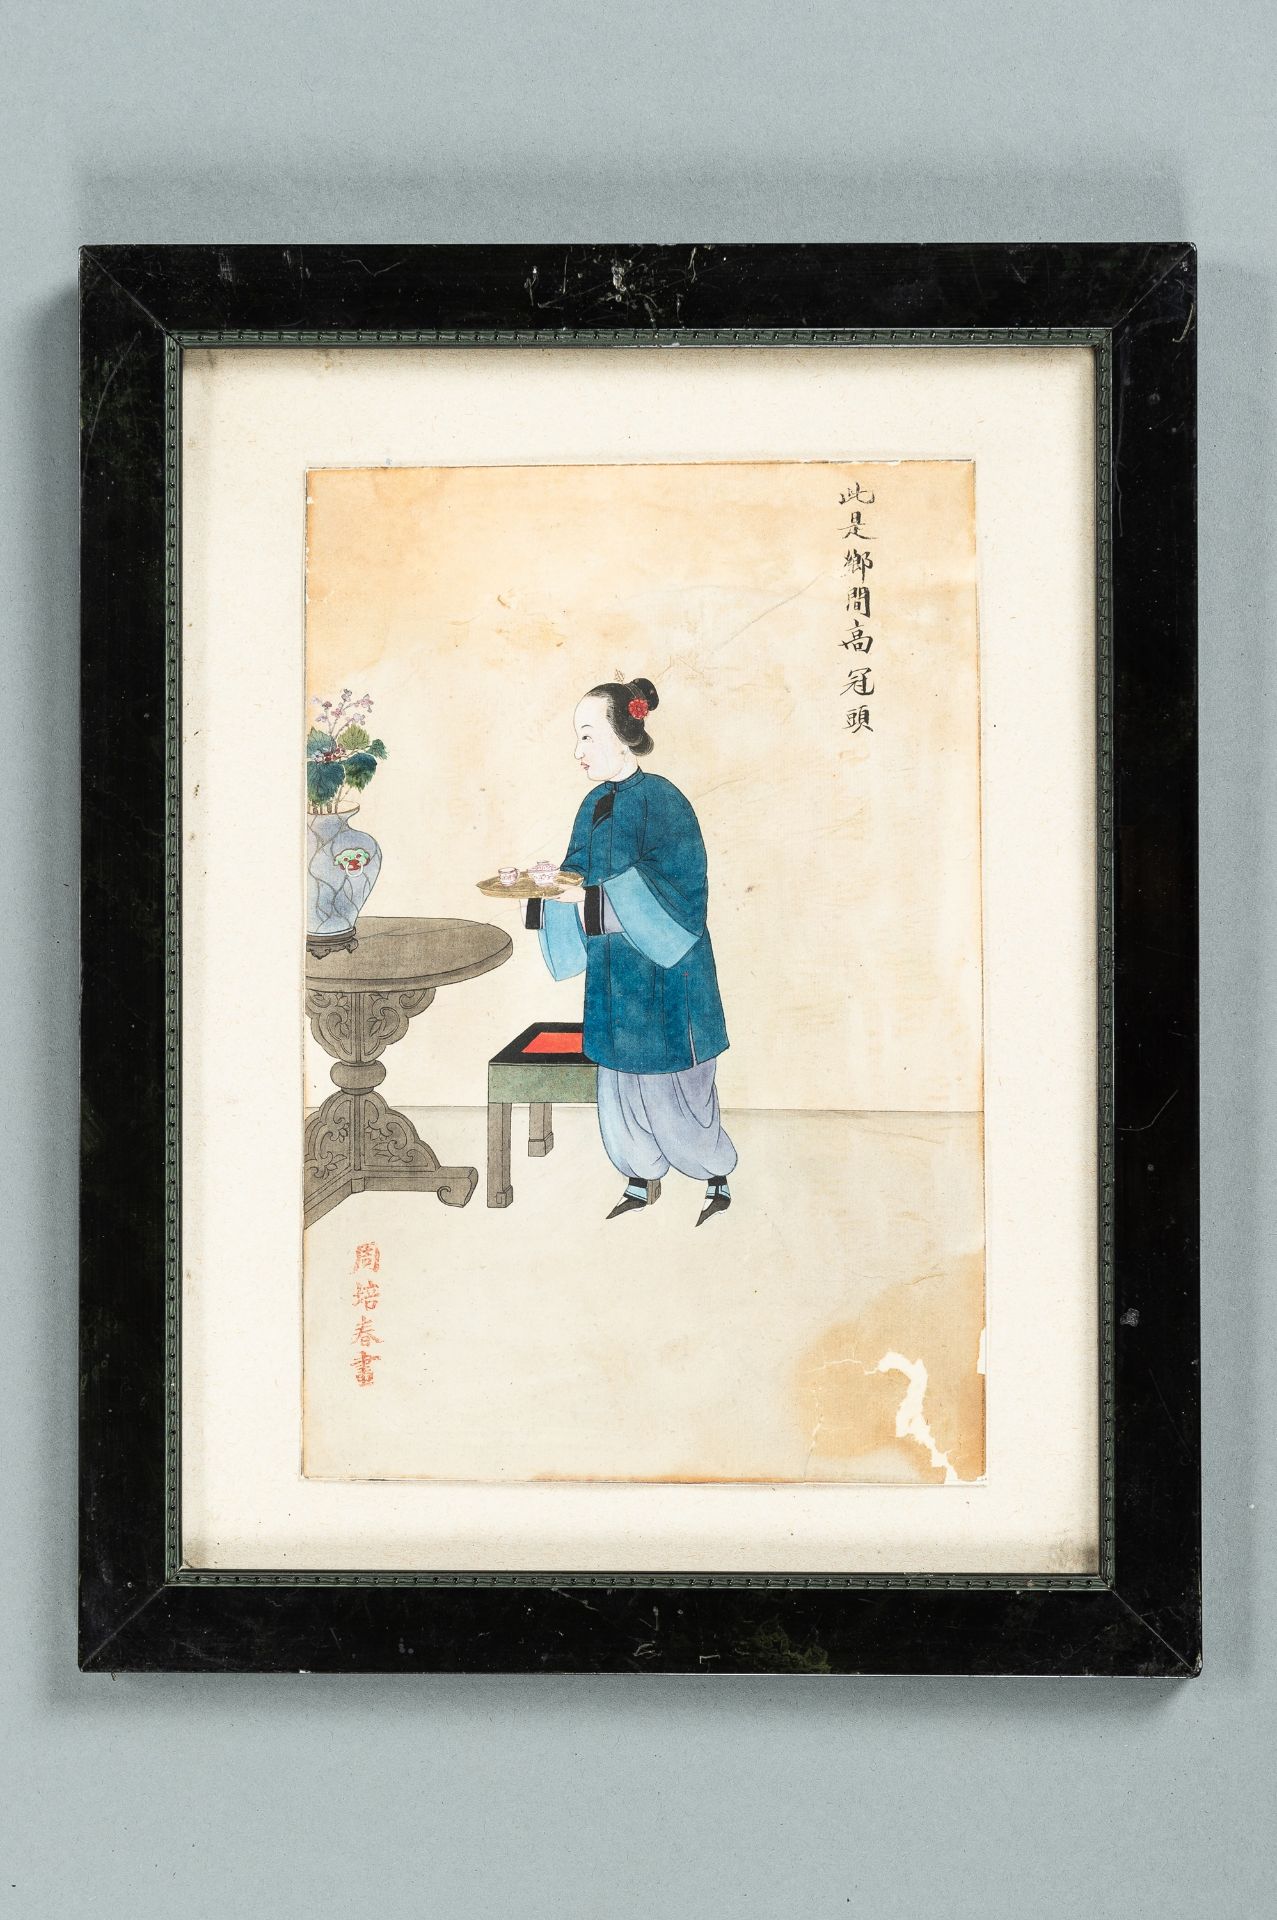 ZHOU PEI CHUN (active 1880-1910): A PAINTING OF A LADY, 1900s - Image 2 of 6